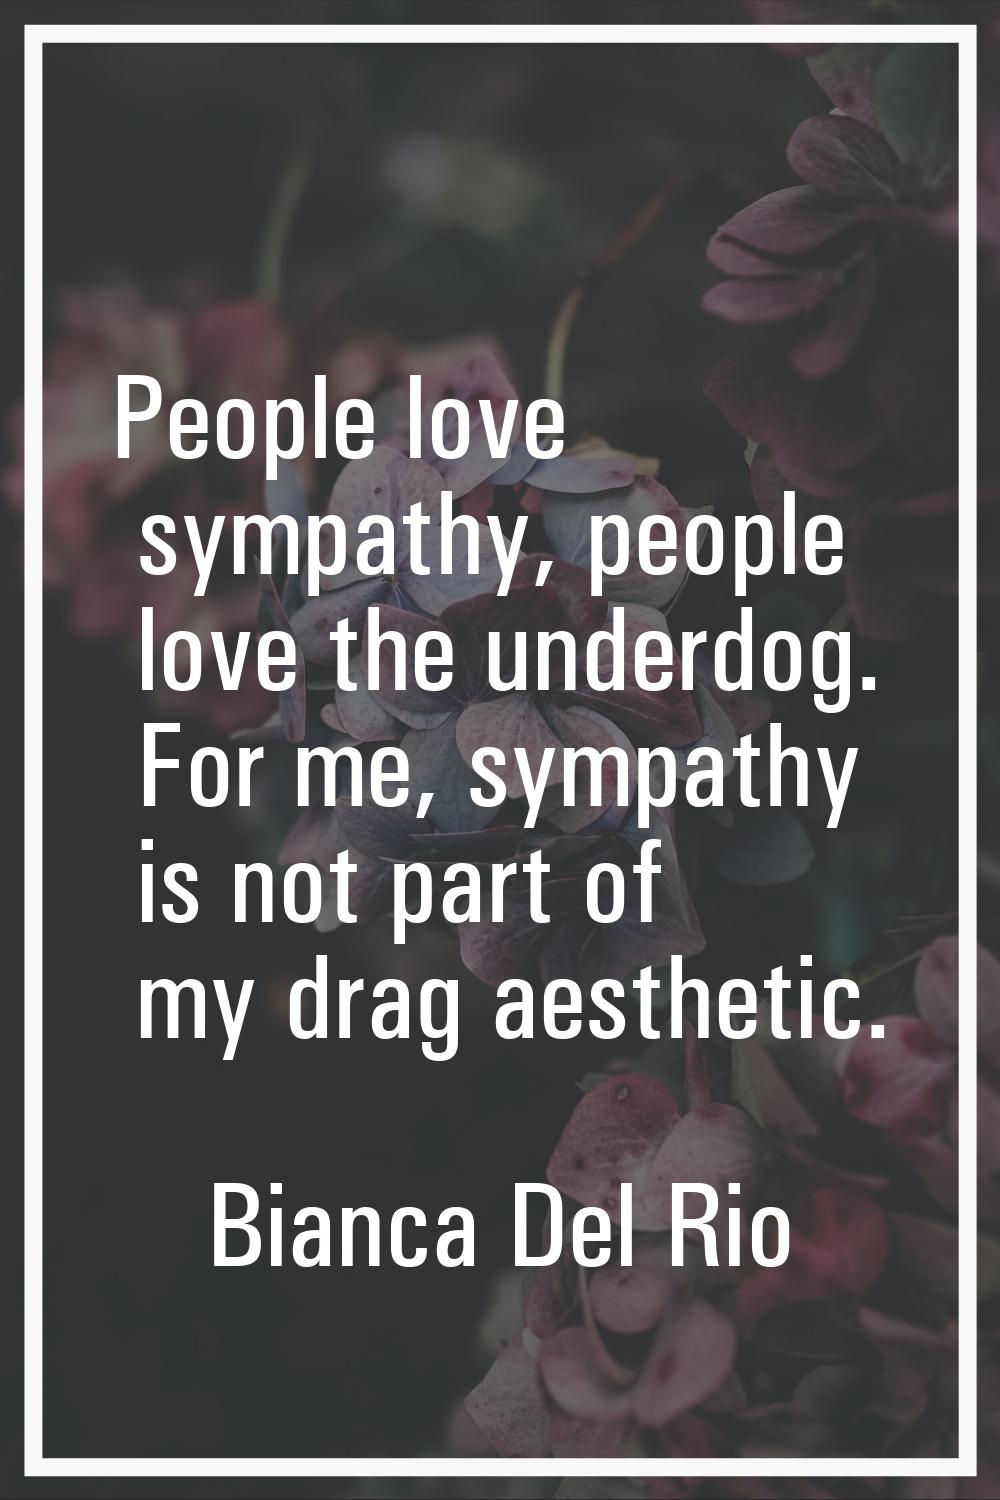 People love sympathy, people love the underdog. For me, sympathy is not part of my drag aesthetic.